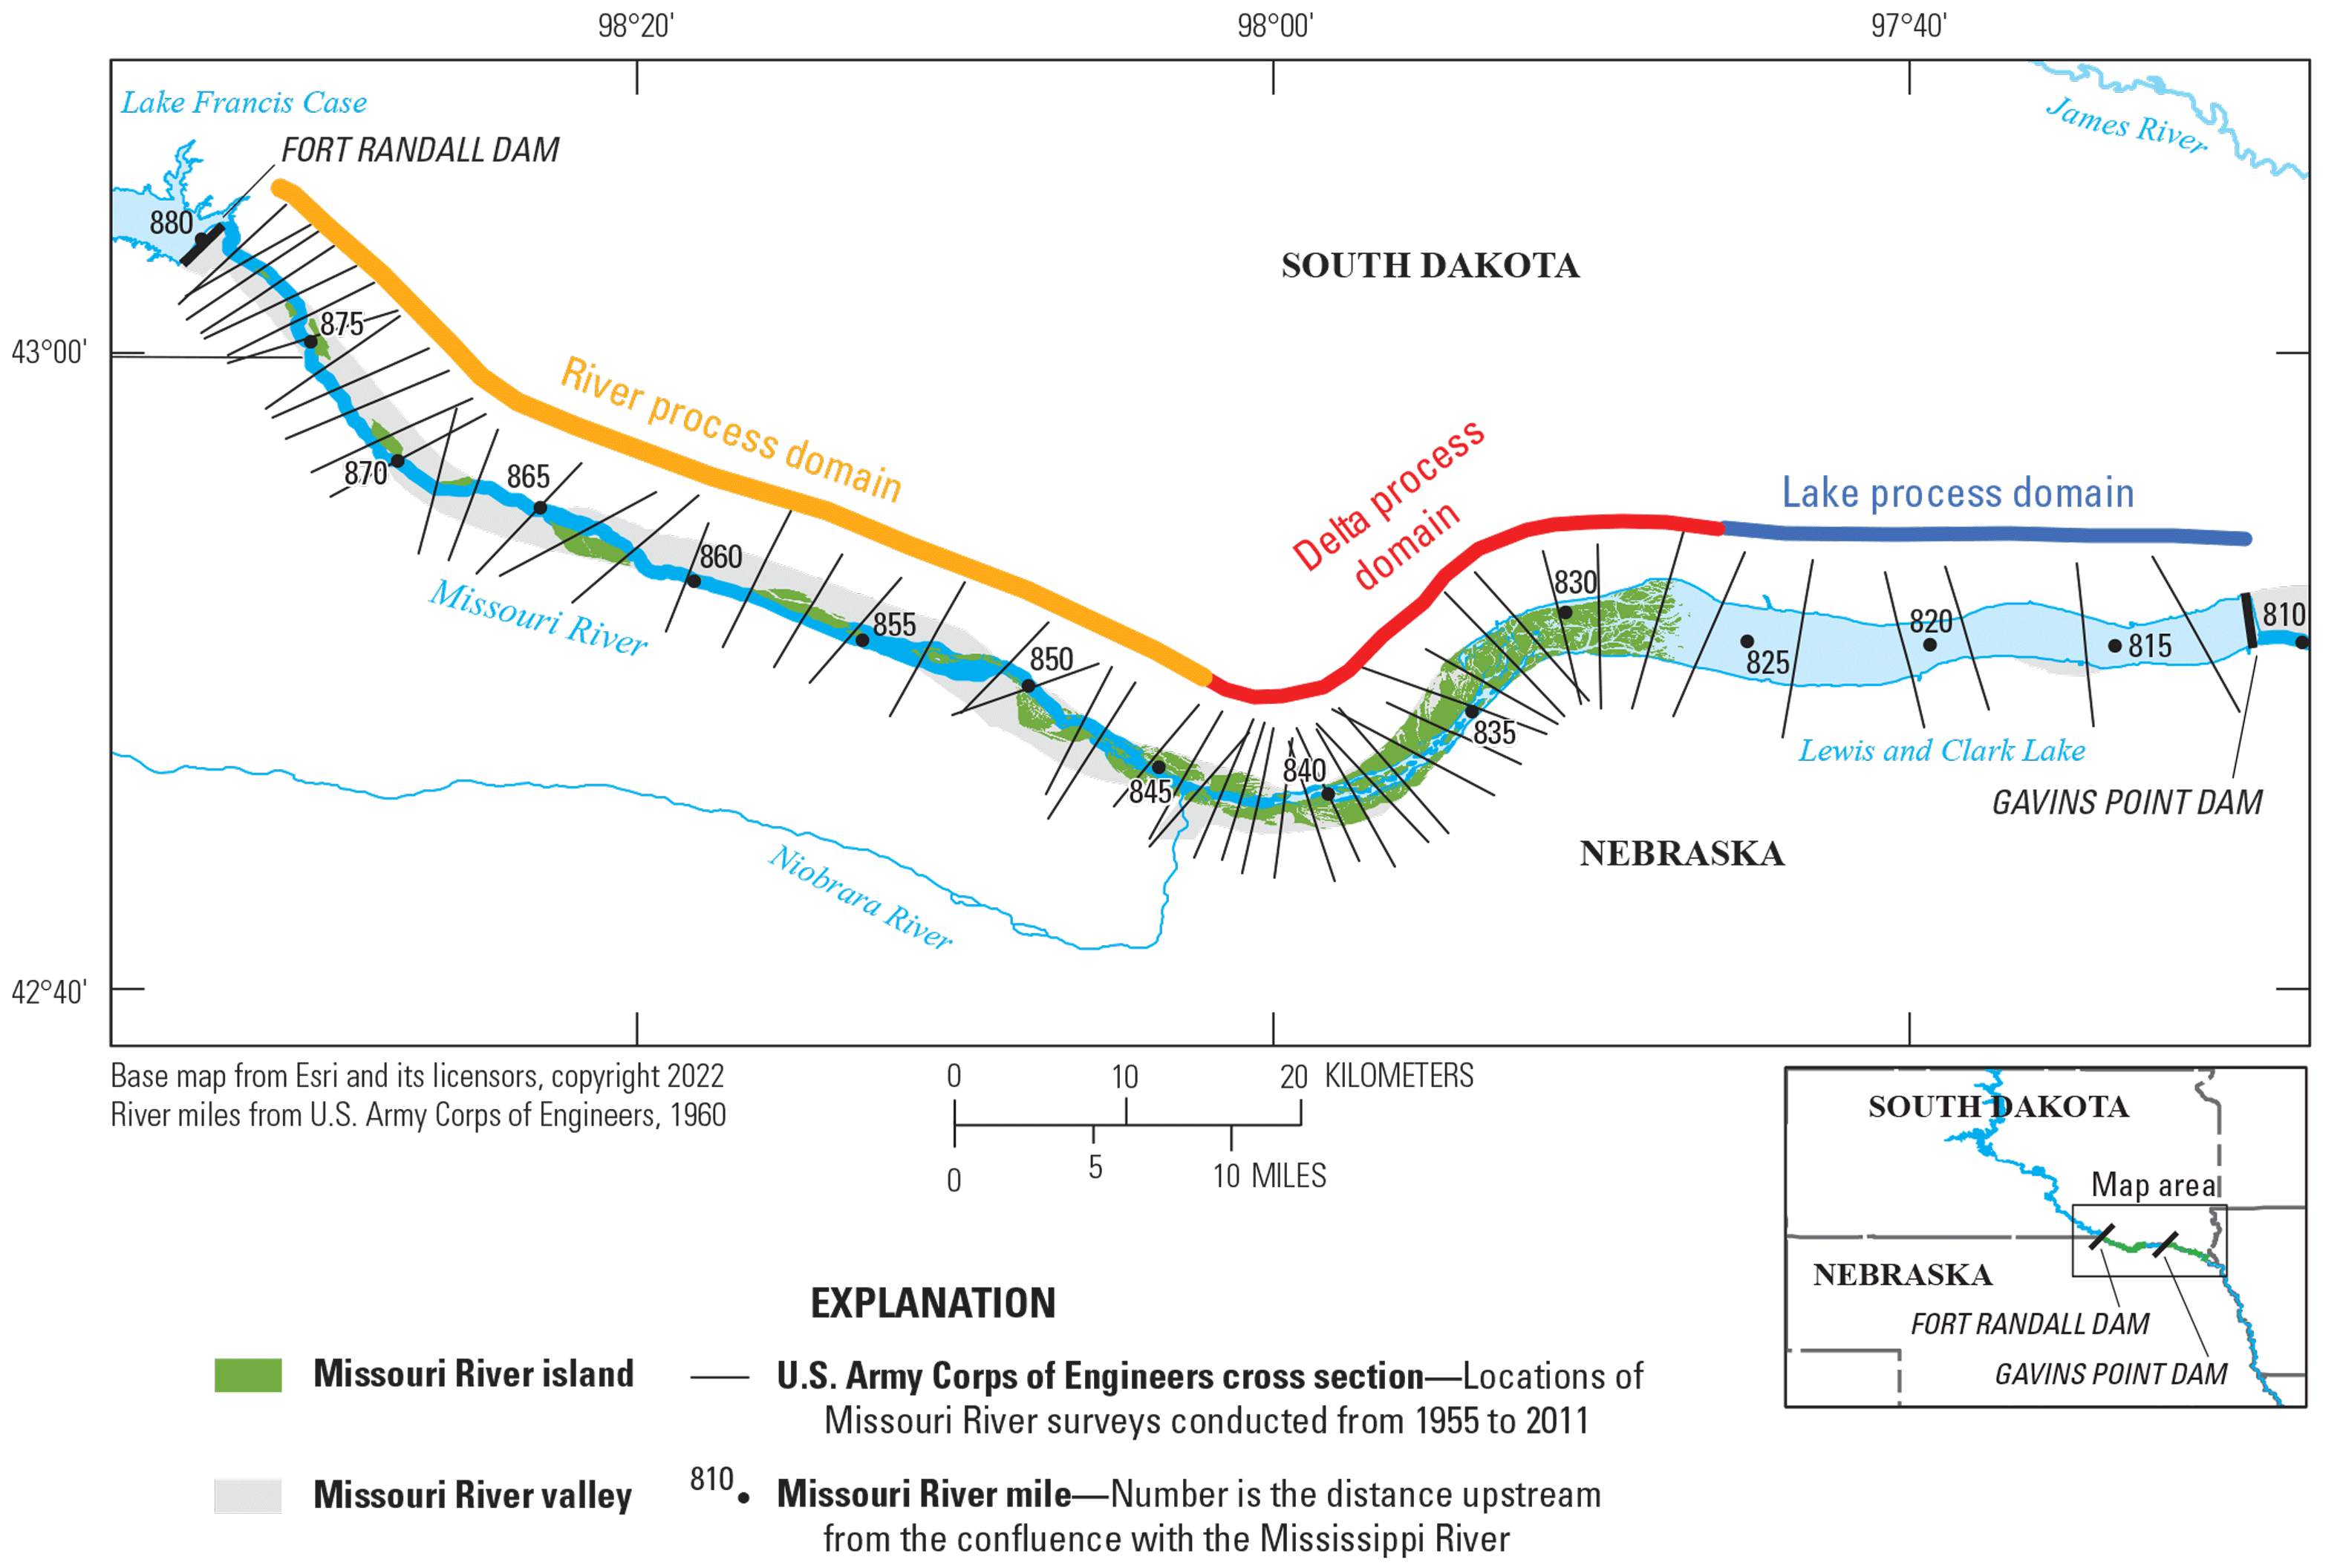 Map showing location of USACE cross sections with symbols for river miles